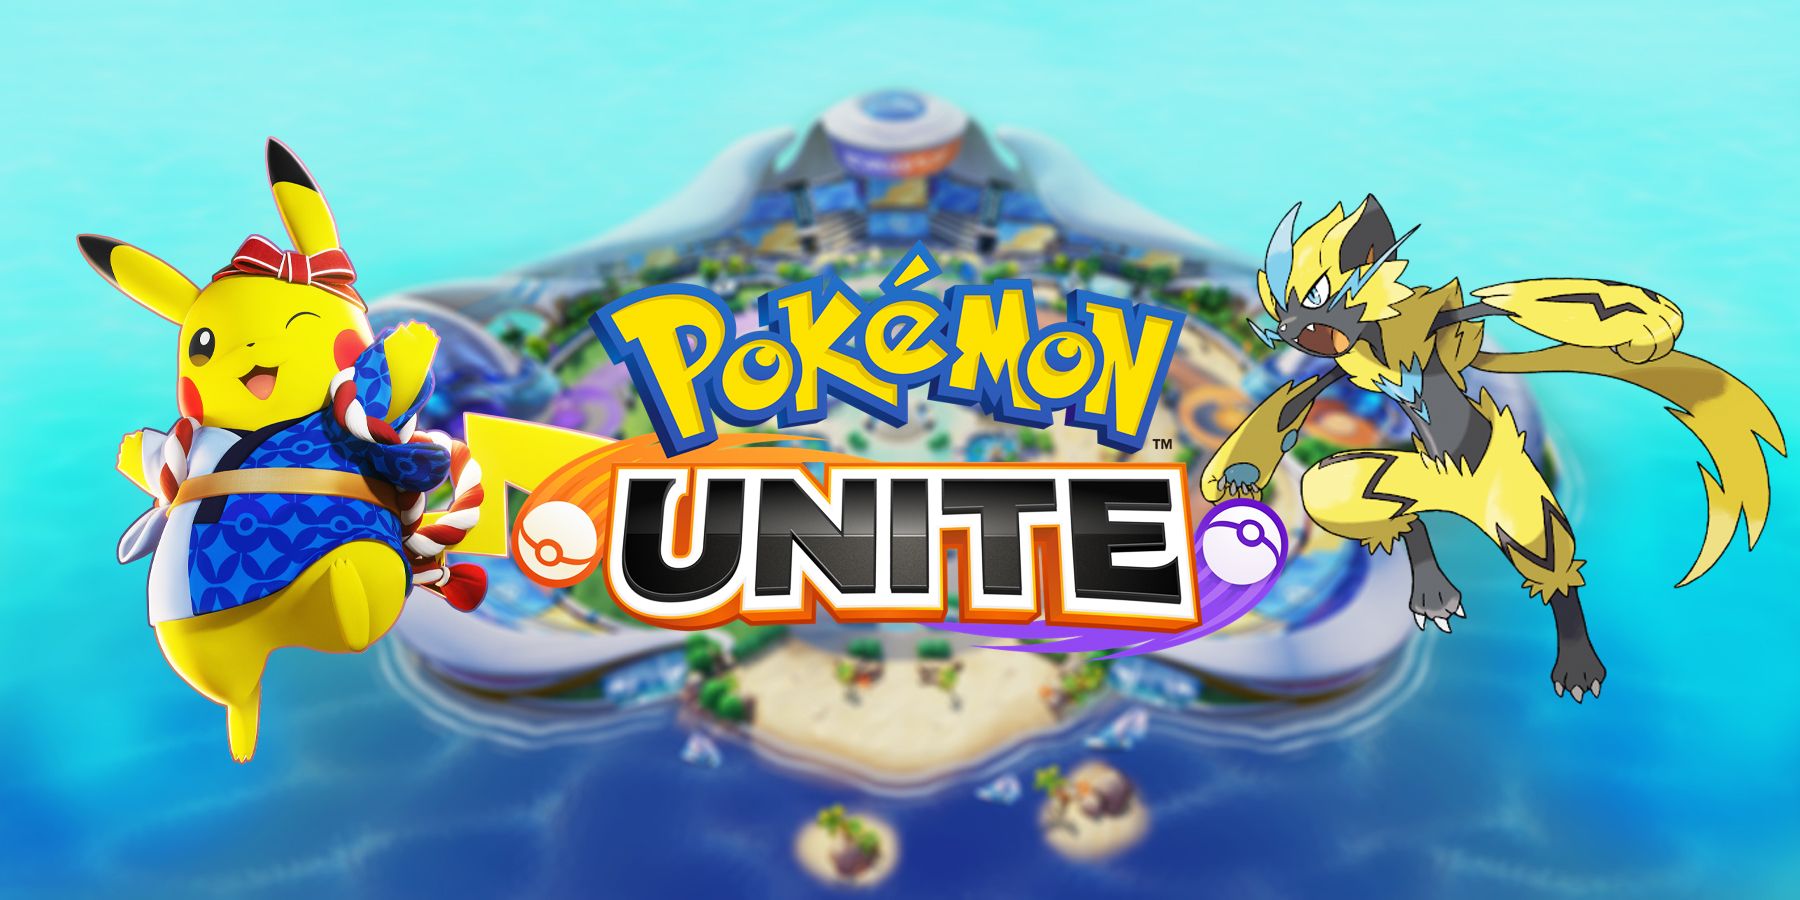 Now Is a Great Time to Start Playing Pokemon Unite